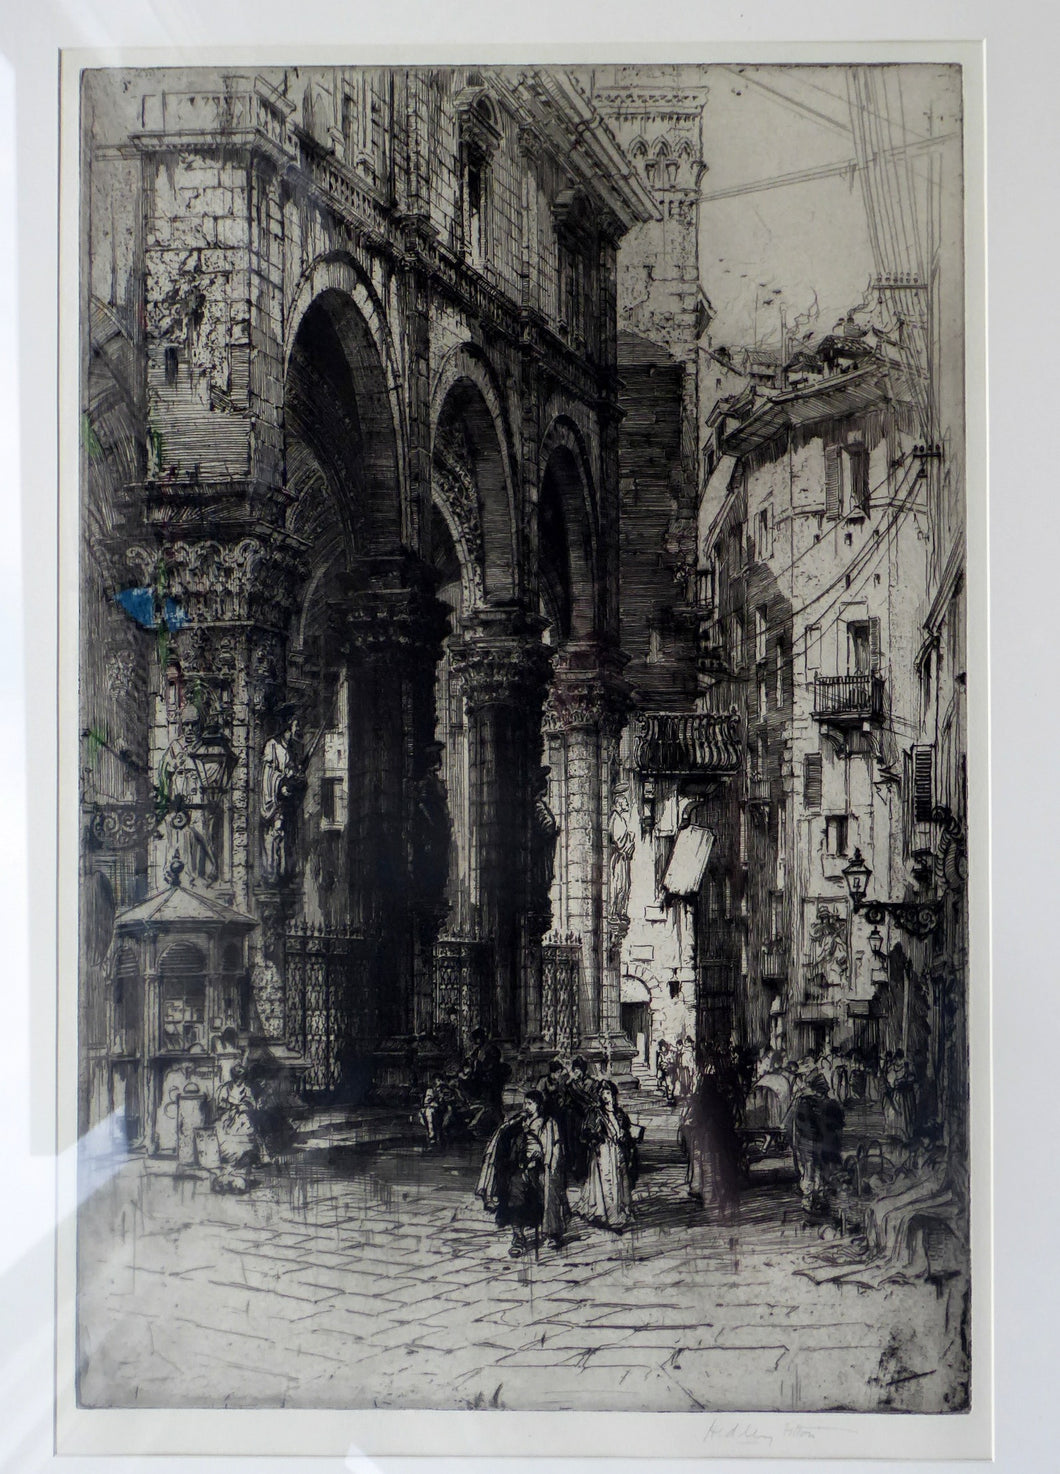 ANTIQUE PRINT. Original 1912 Etching by Hedley FITTON. Entitled: Casino di Nobile, Siena. Framed & Pencil Signed